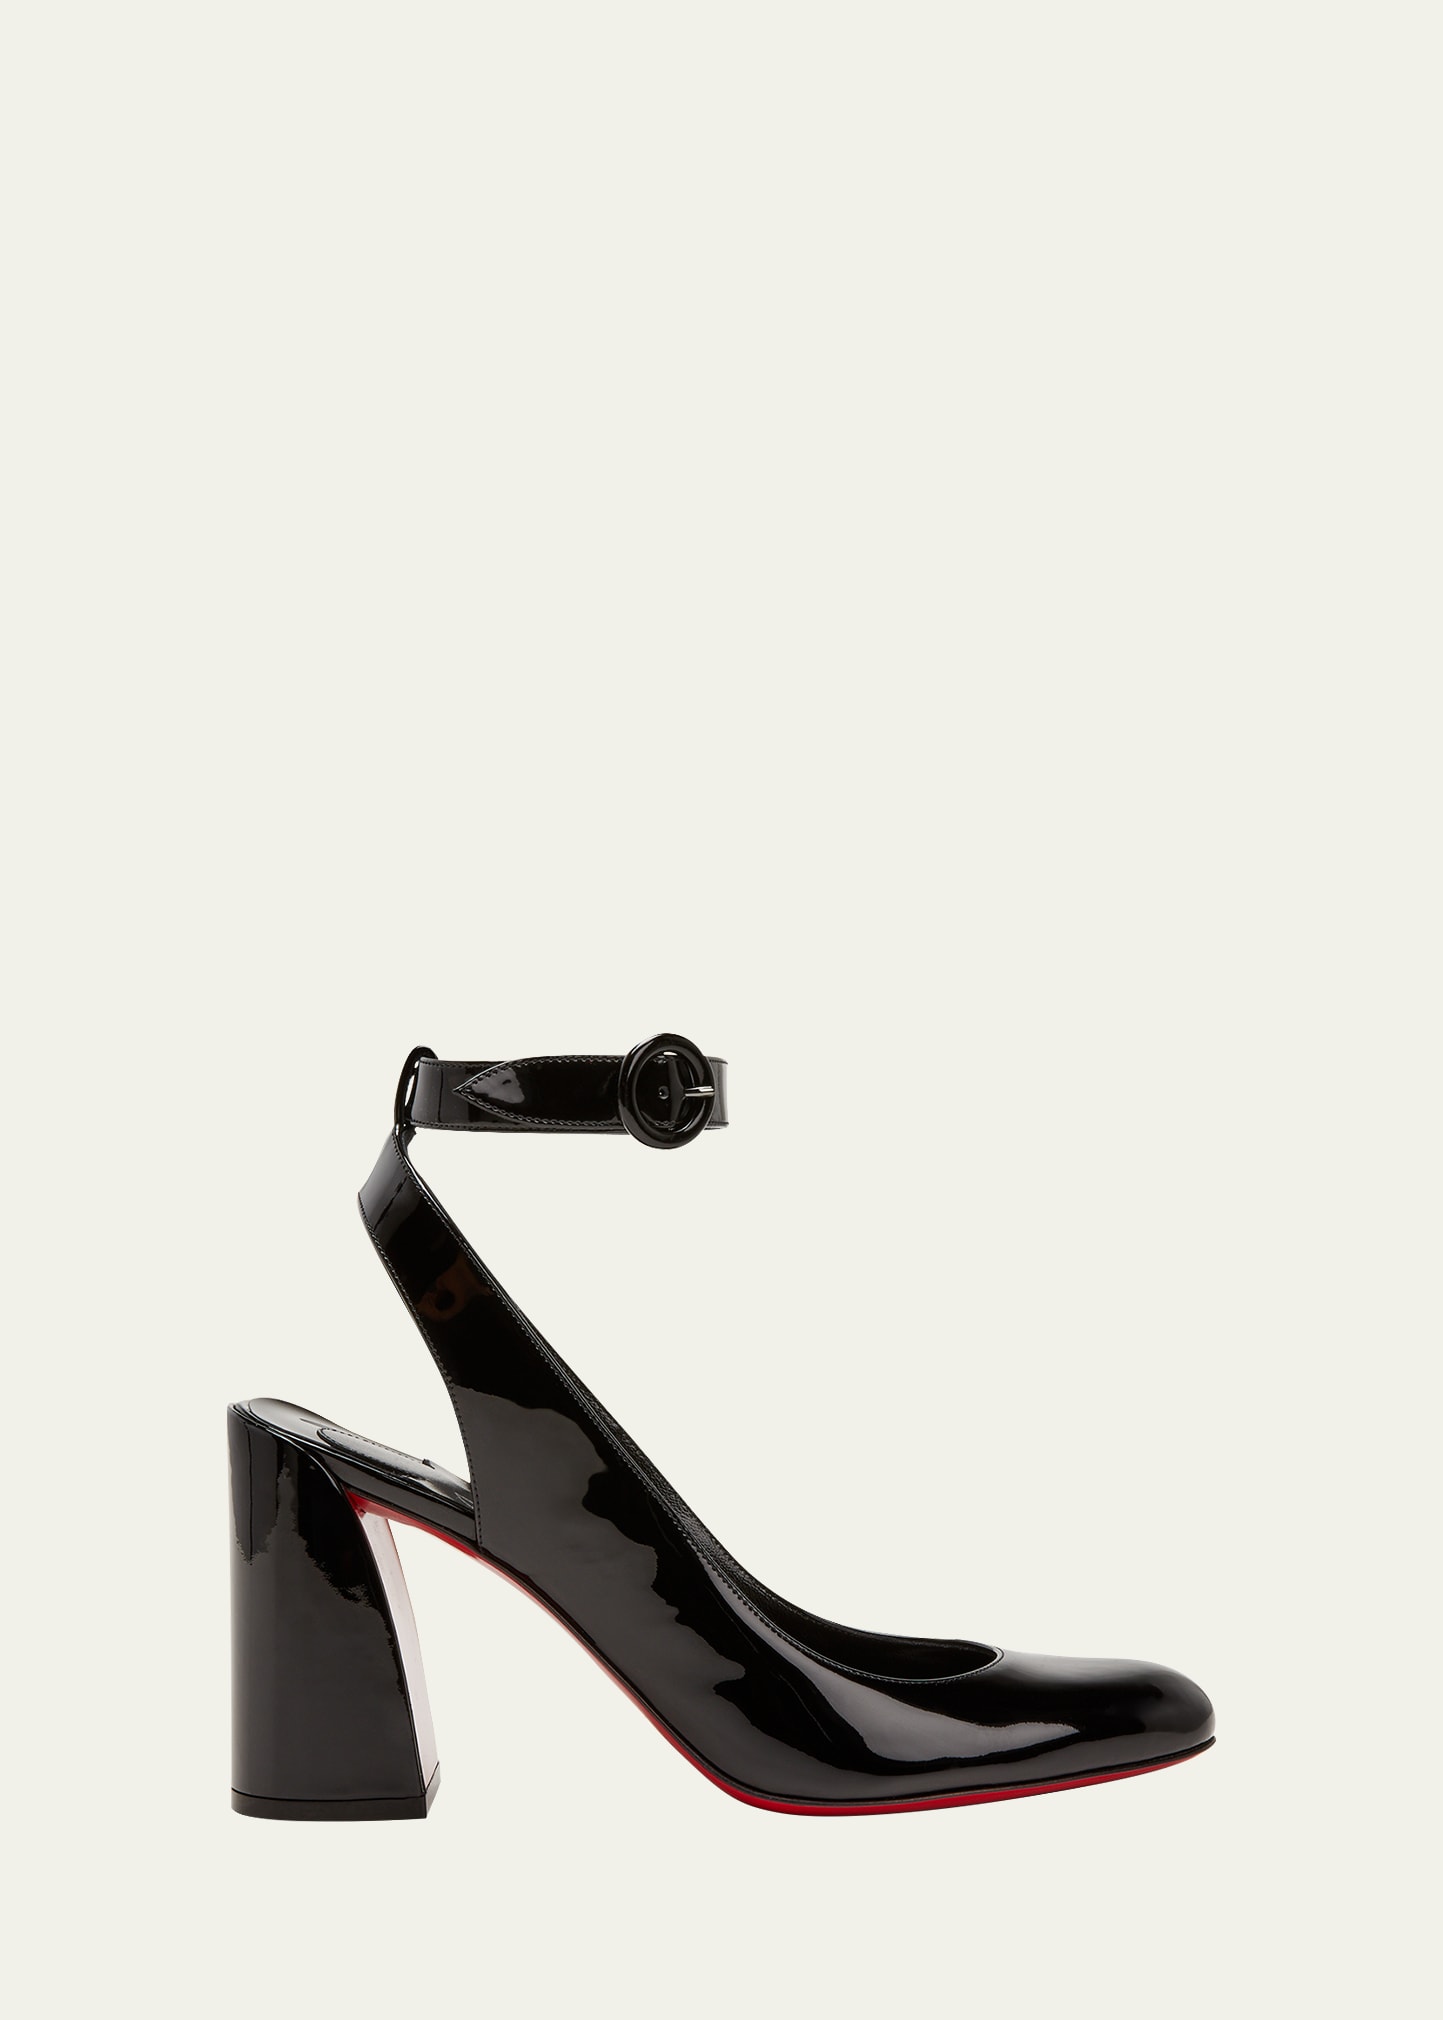 Miss Sab Patent Red Sole Pumps